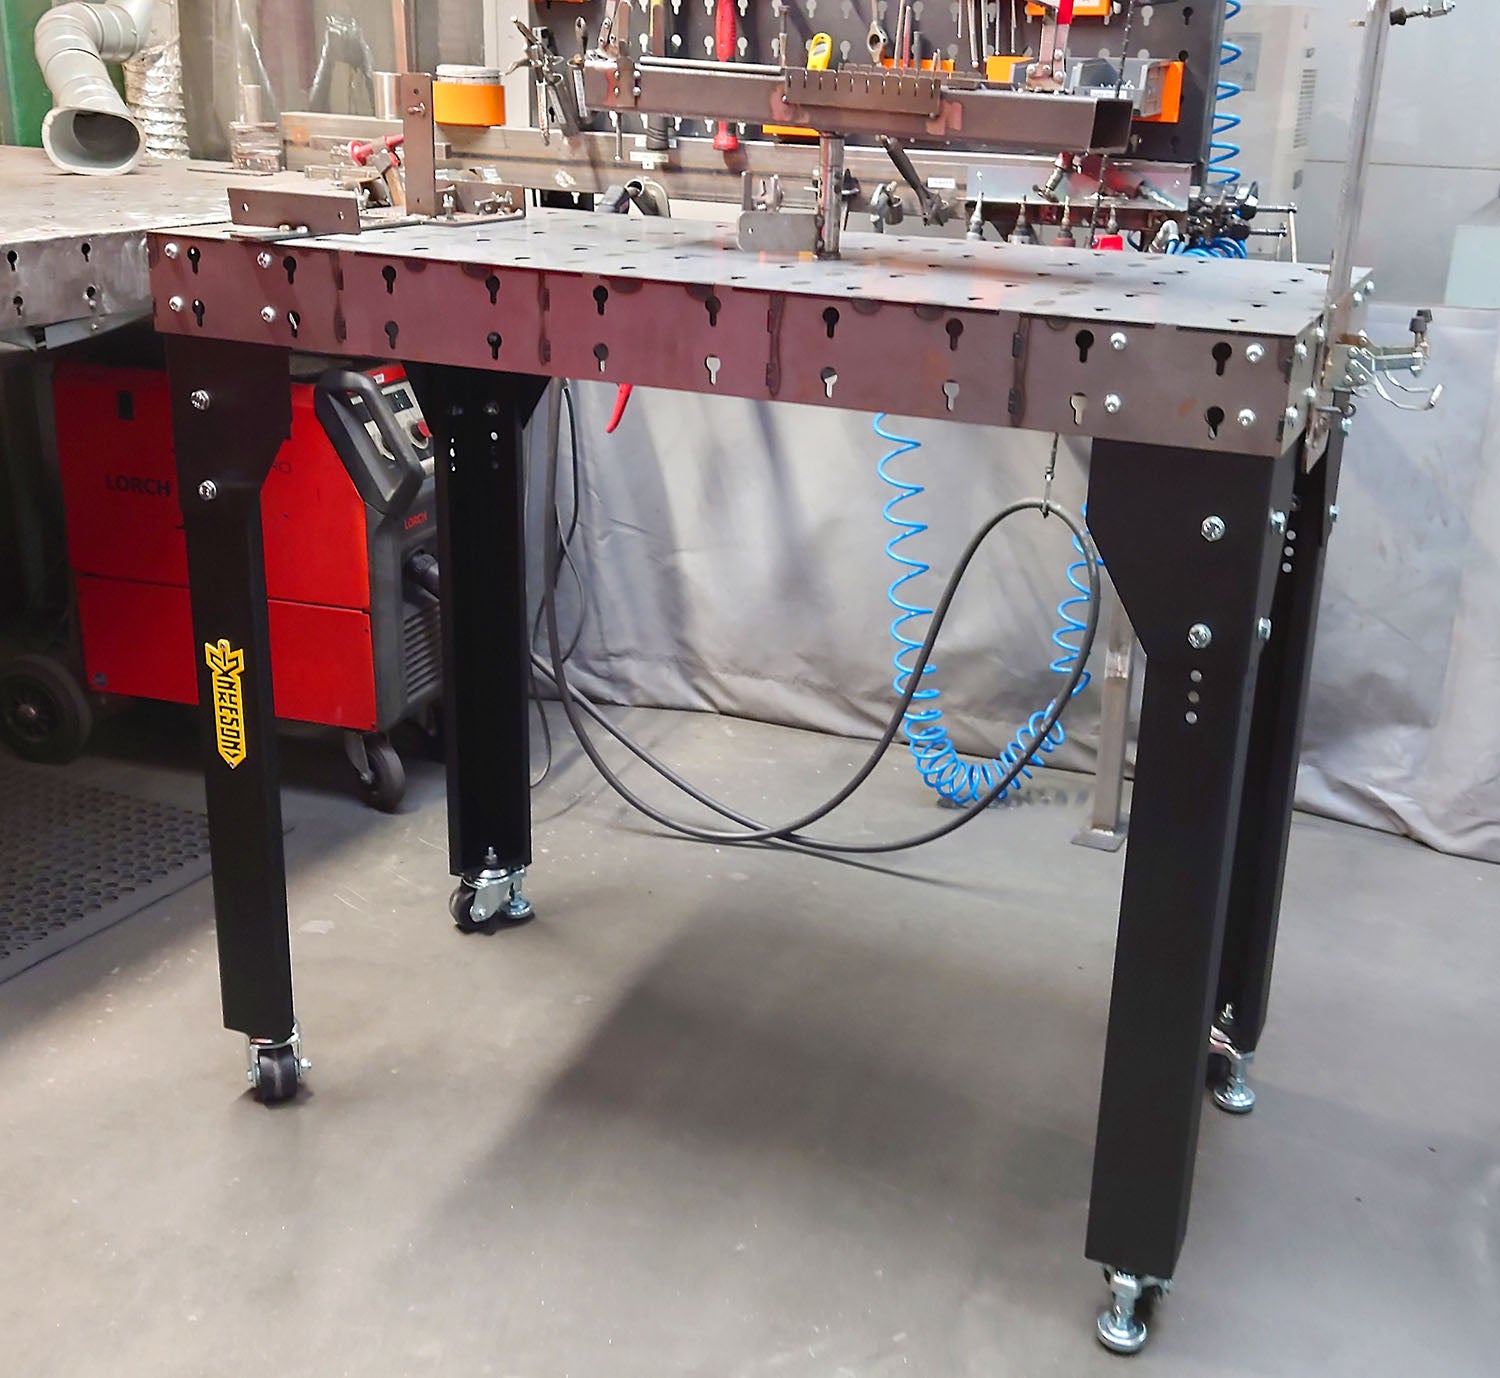 Square shot of the Modular Welding Table in a welding environment